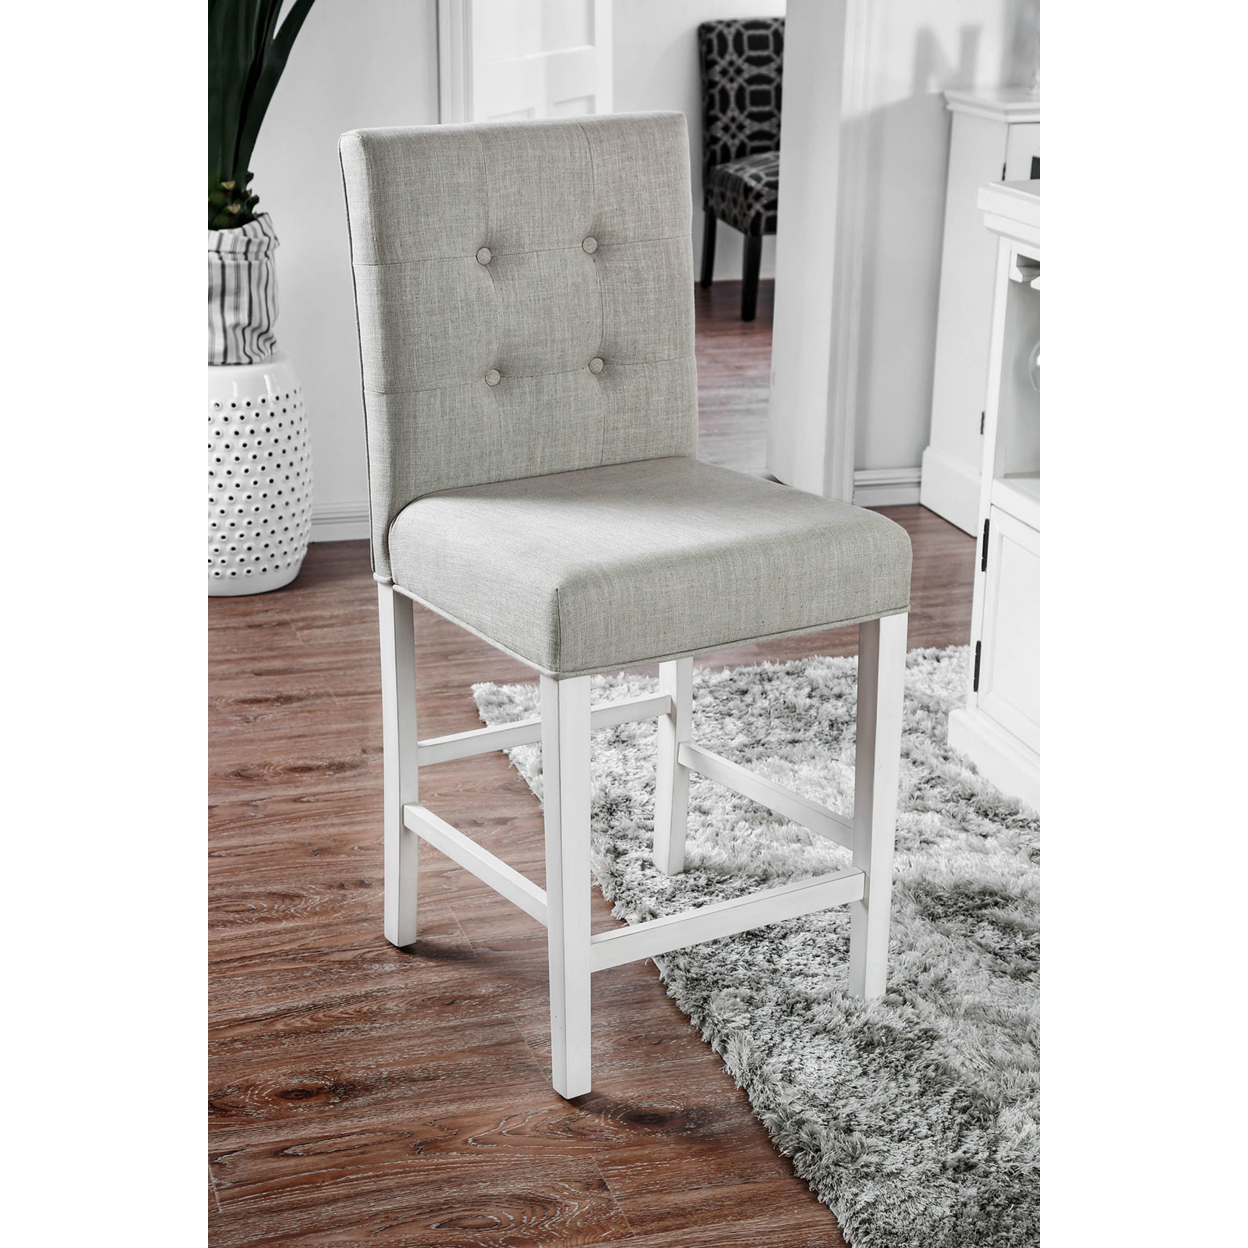 Fabric Upholstered Solid Wood Counter Height Chair, White And Gray, Pack Of Two- Saltoro Sherpi